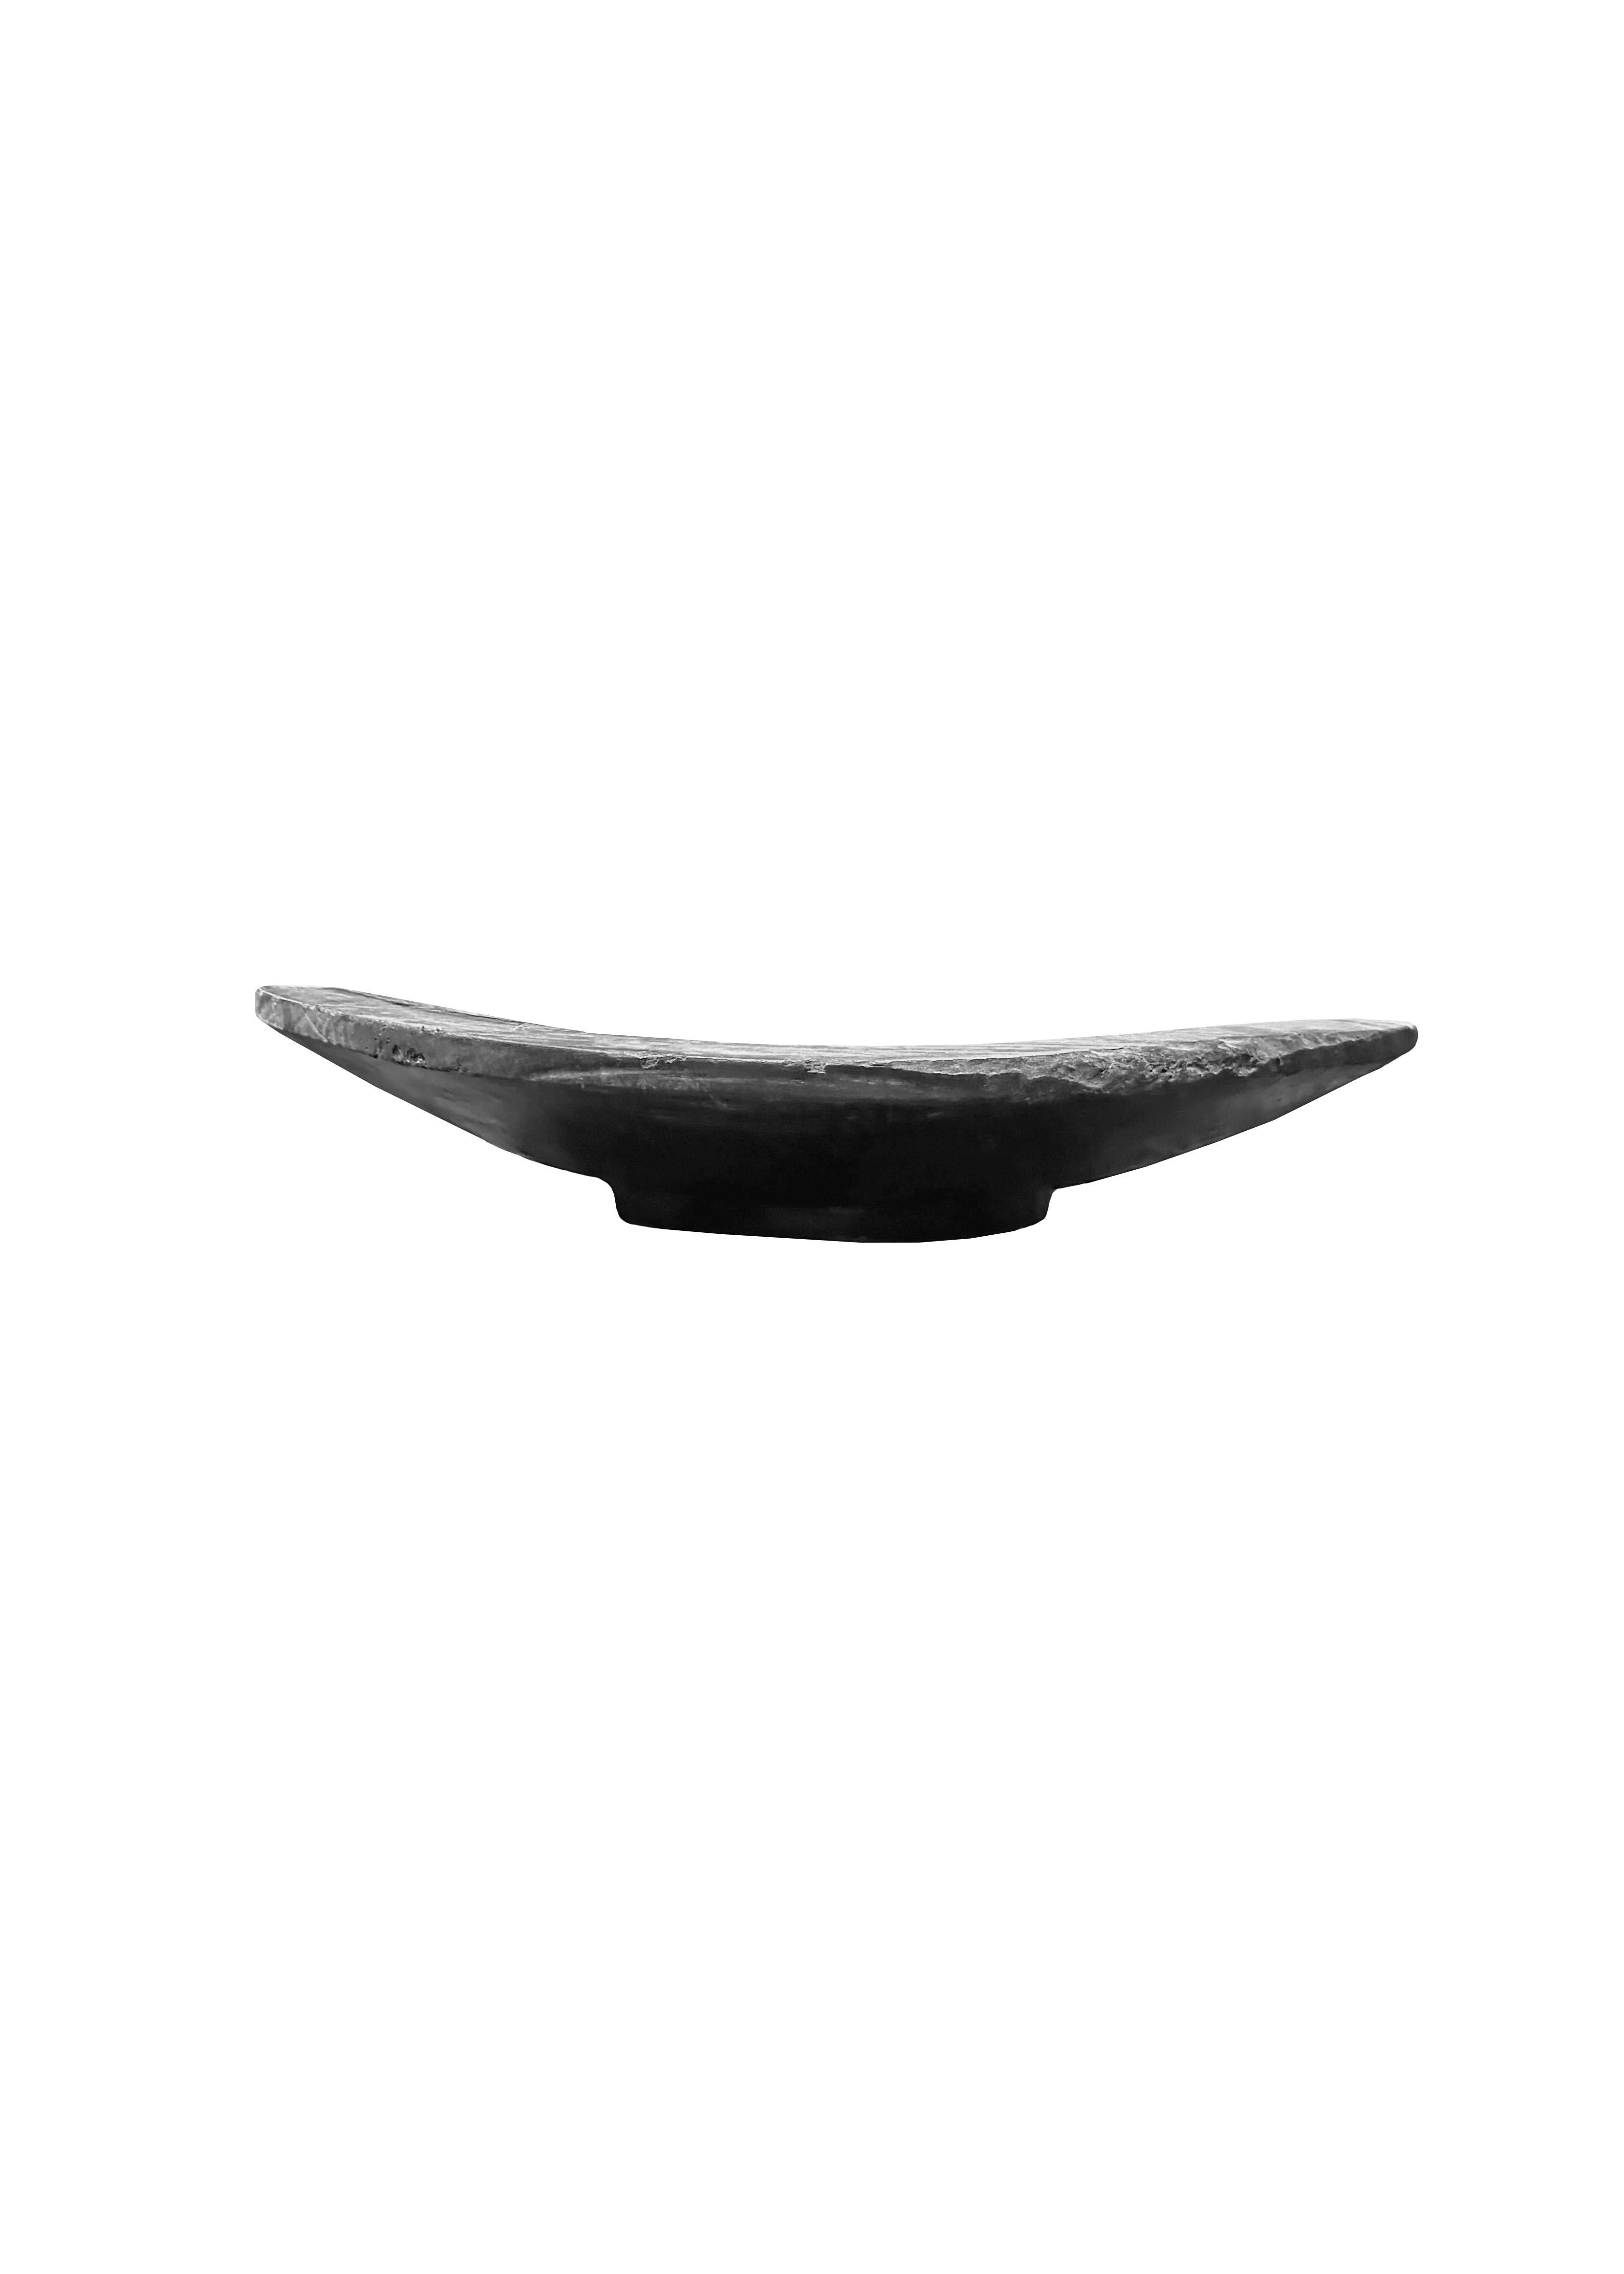 Contemporary Sculptural Mango Wood Bowl with Hand-Hewn Detailing, Burnt Finish For Sale